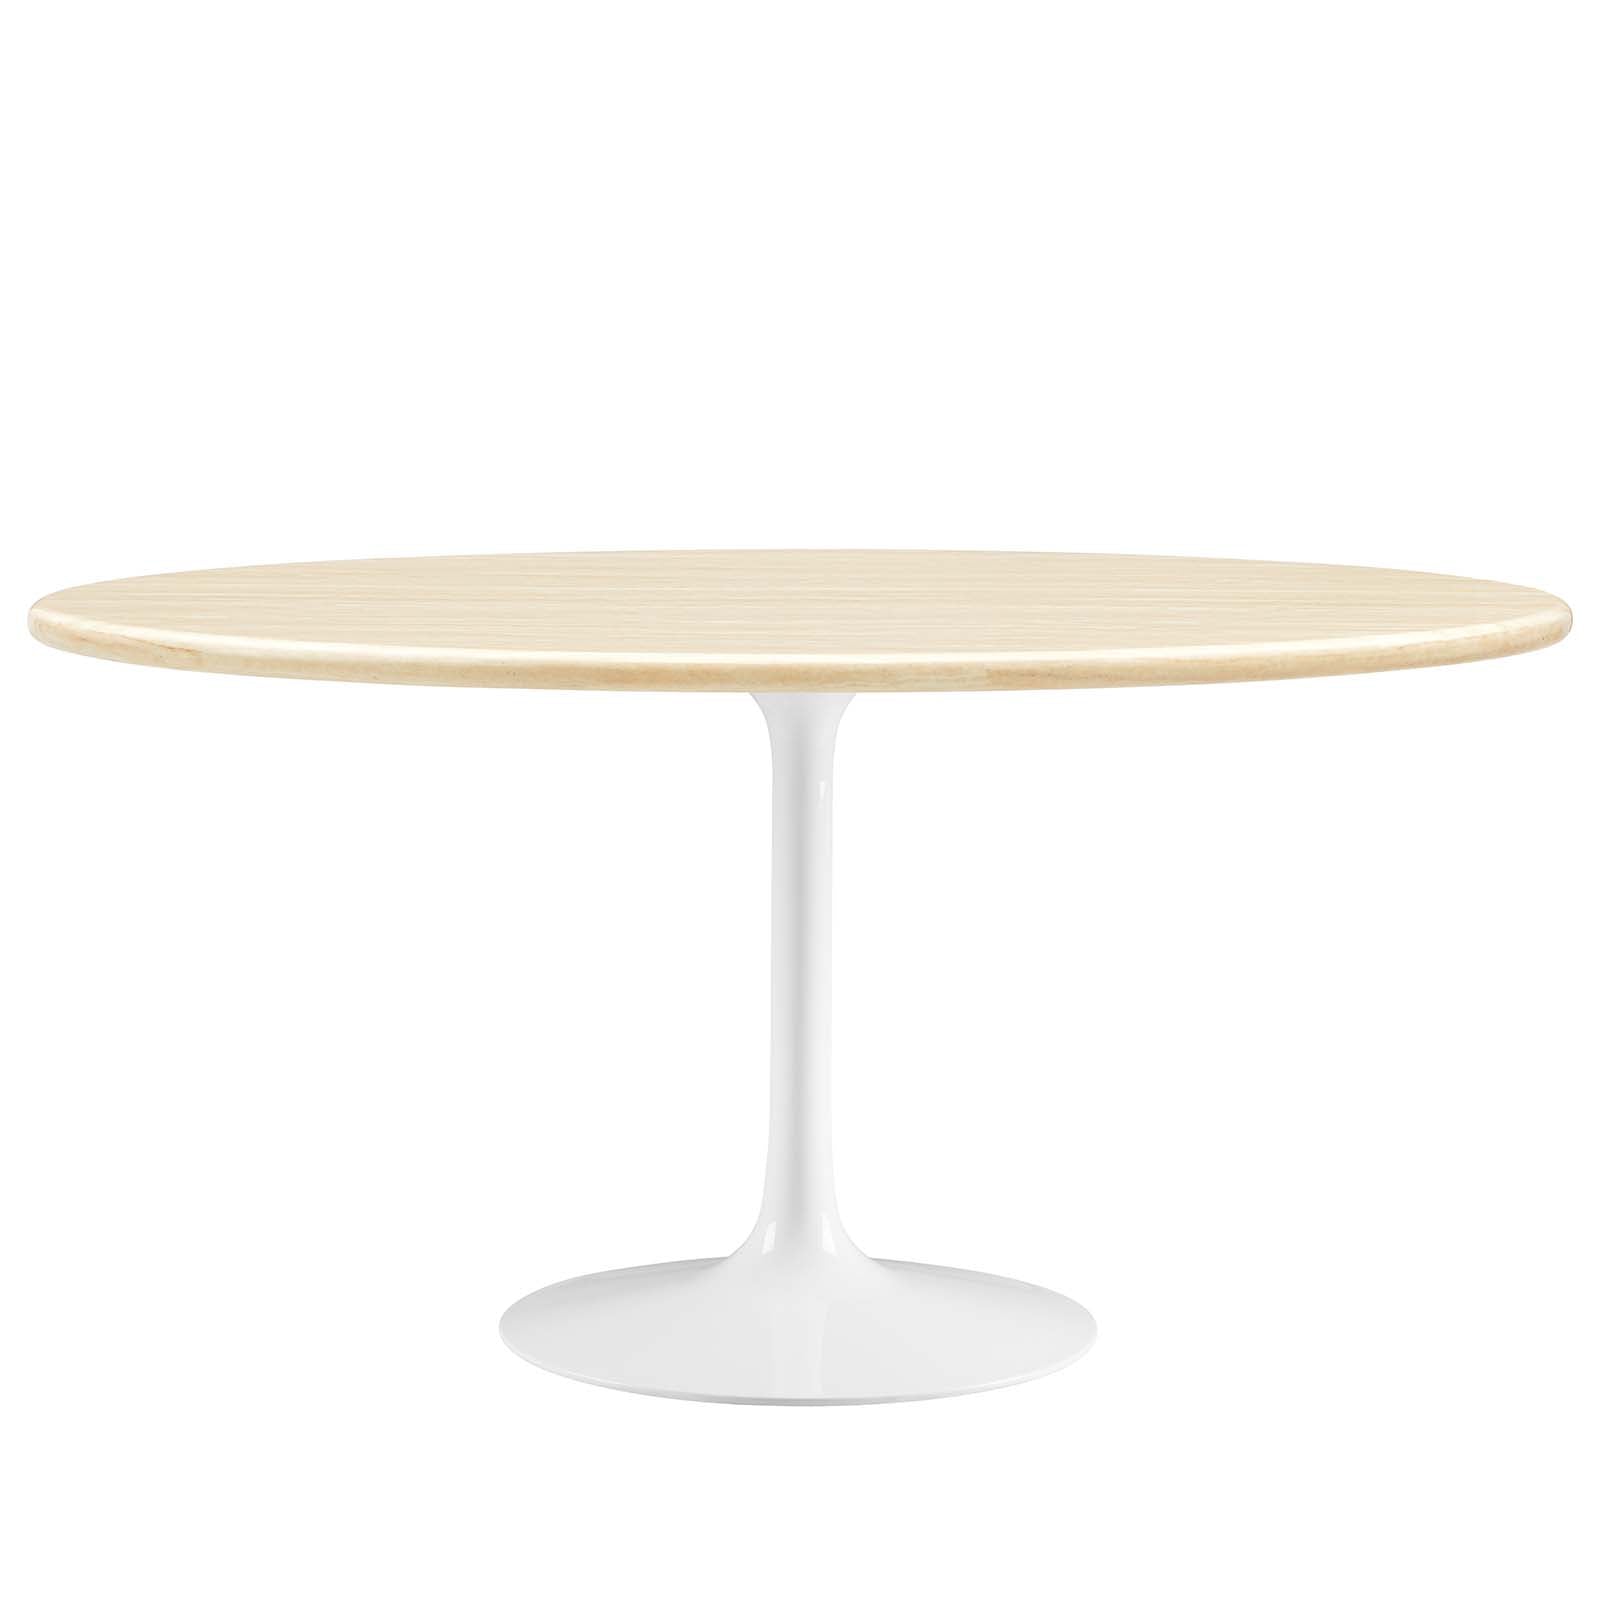 Lippa 60" Oval Artificial Travertine Dining Table - East Shore Modern Home Furnishings